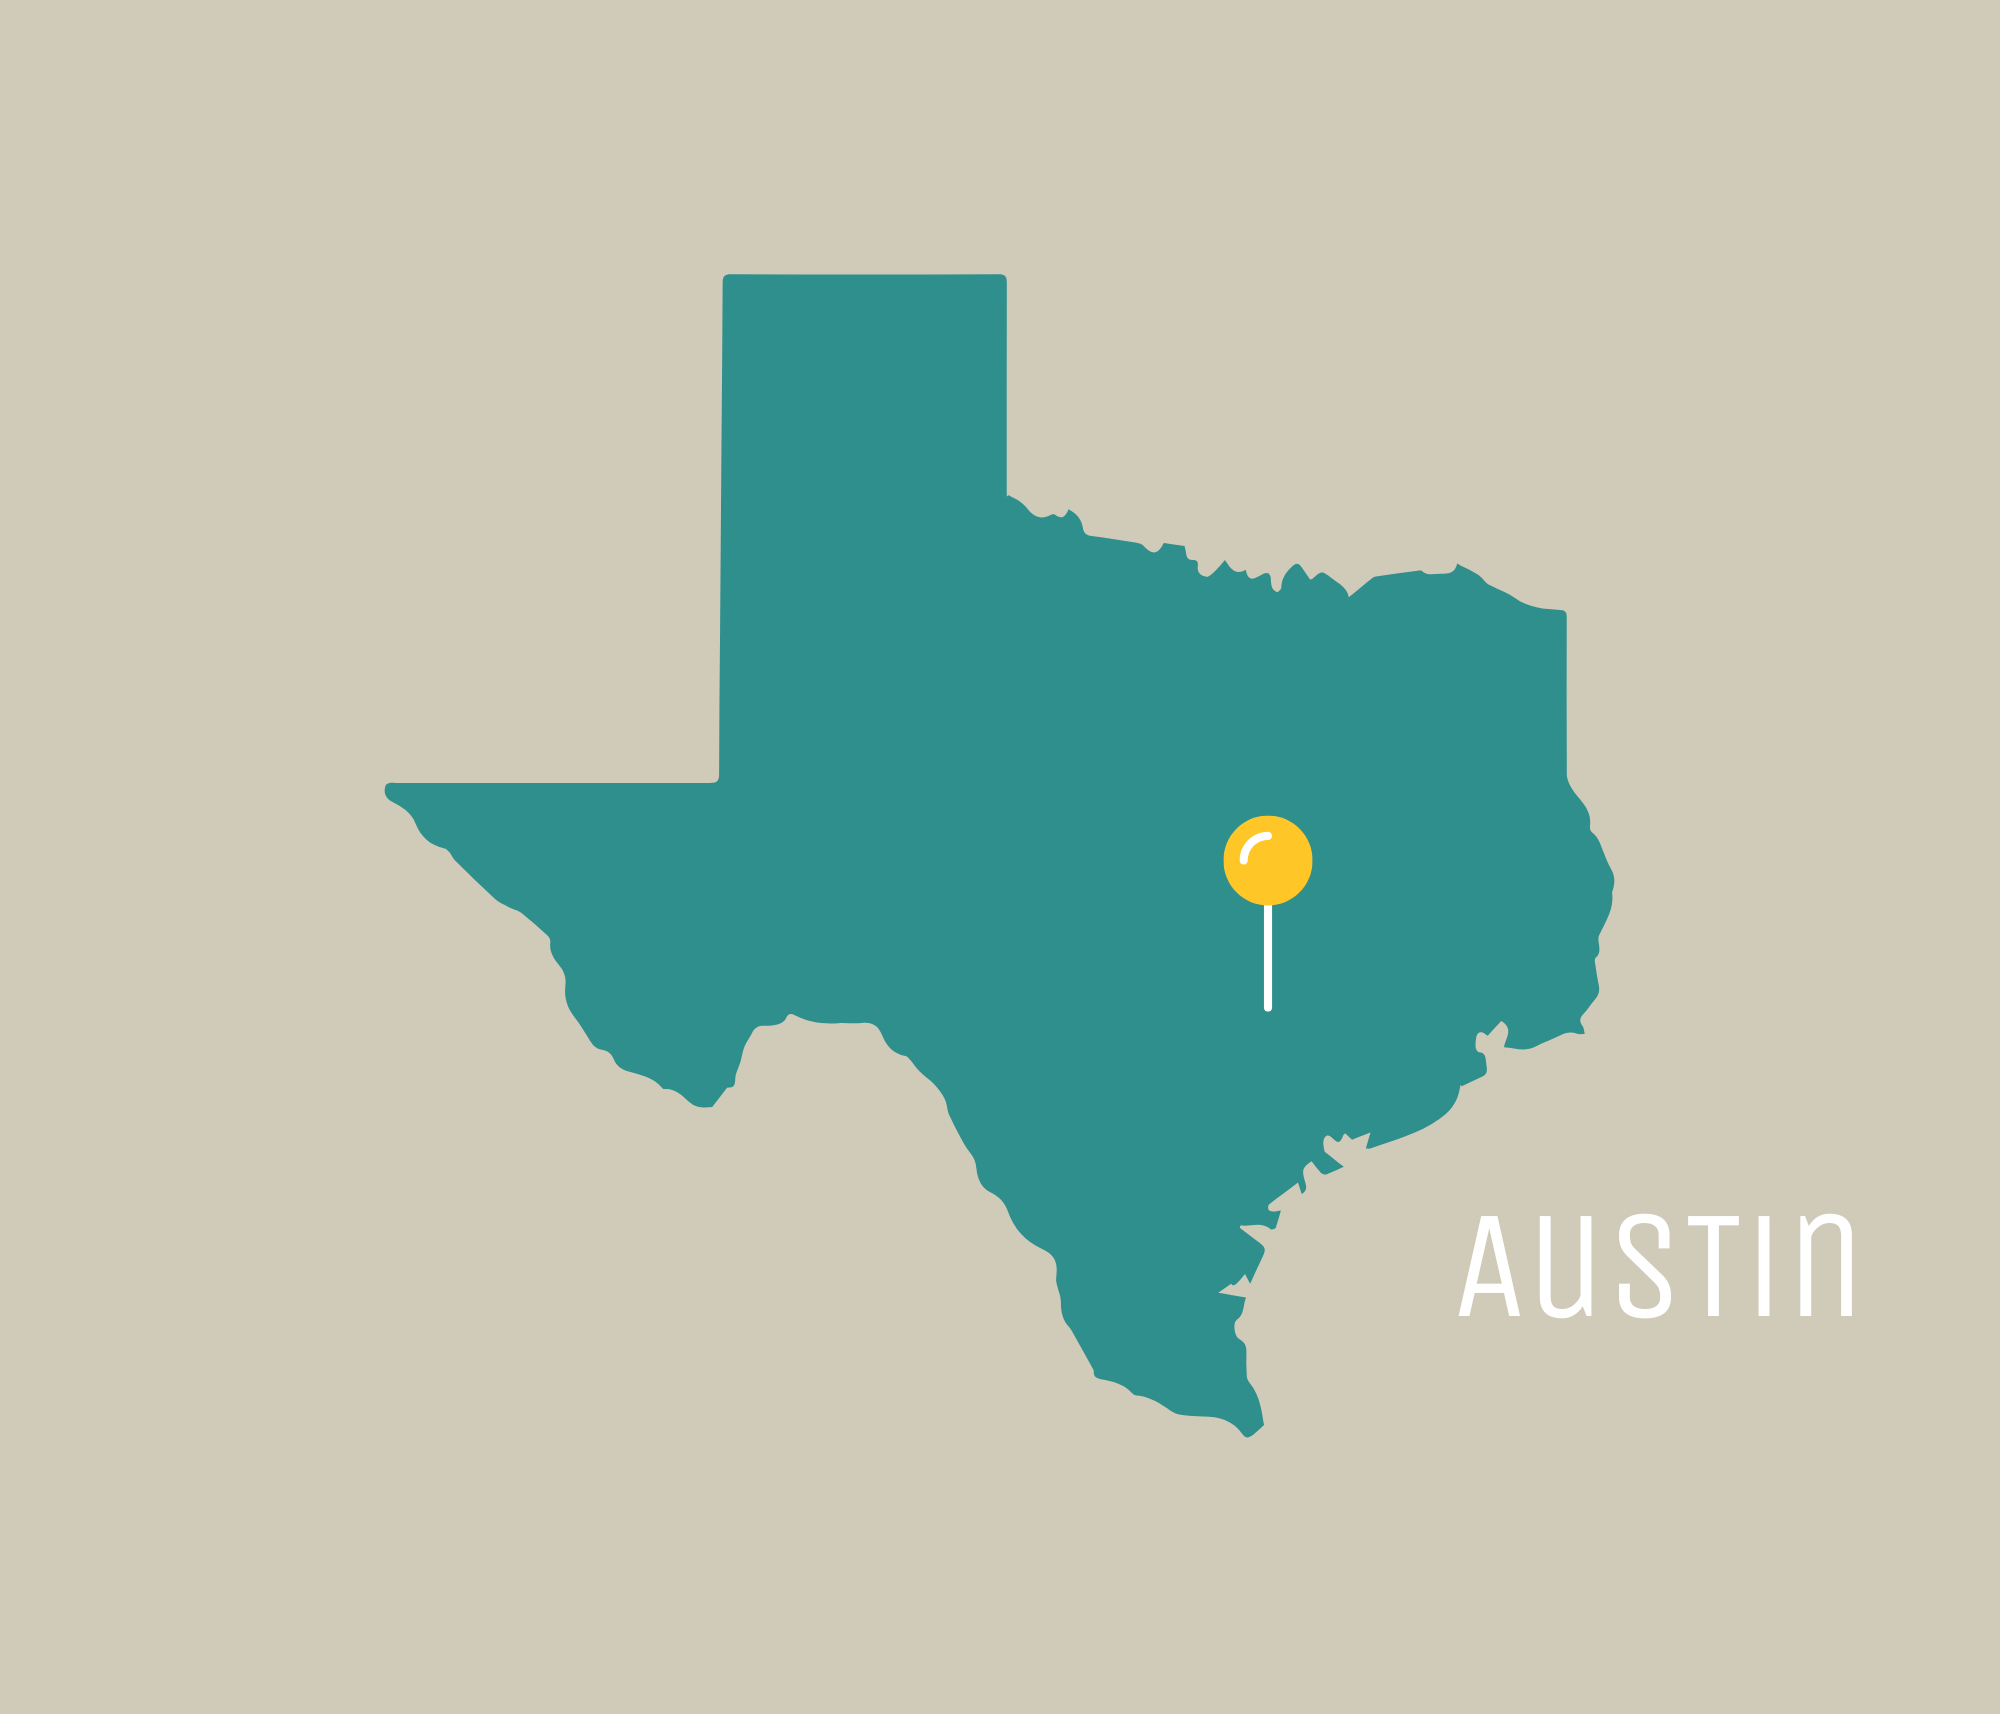 yellow pin in the state of Texas where Austin is